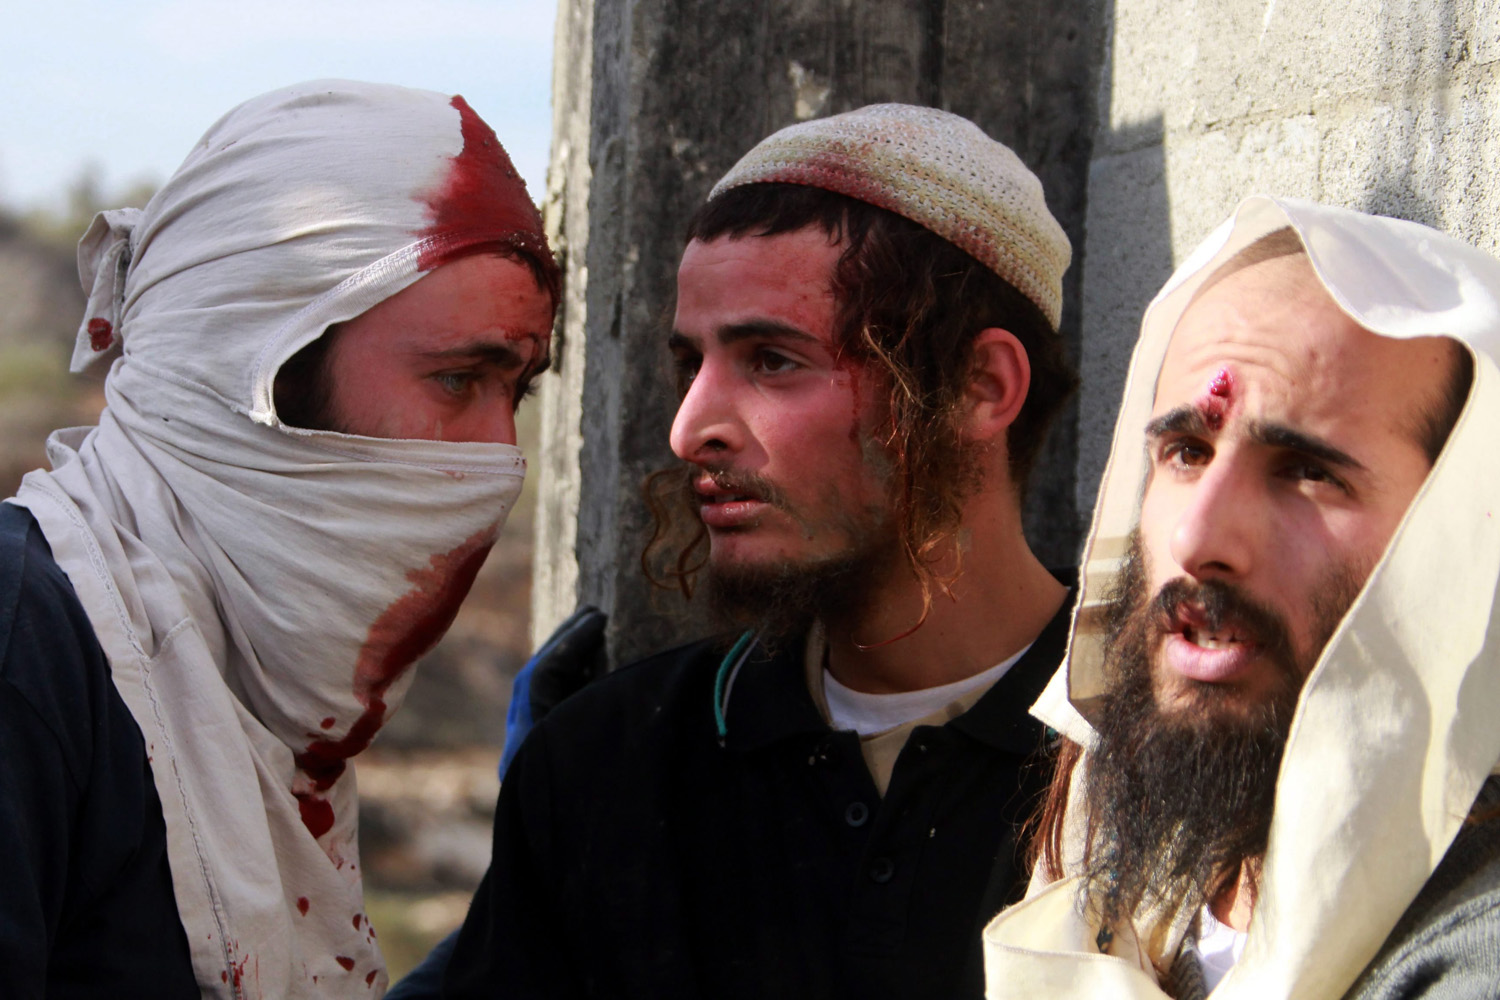 Palestinian villagers detained and beat up a group of Israeli settlers